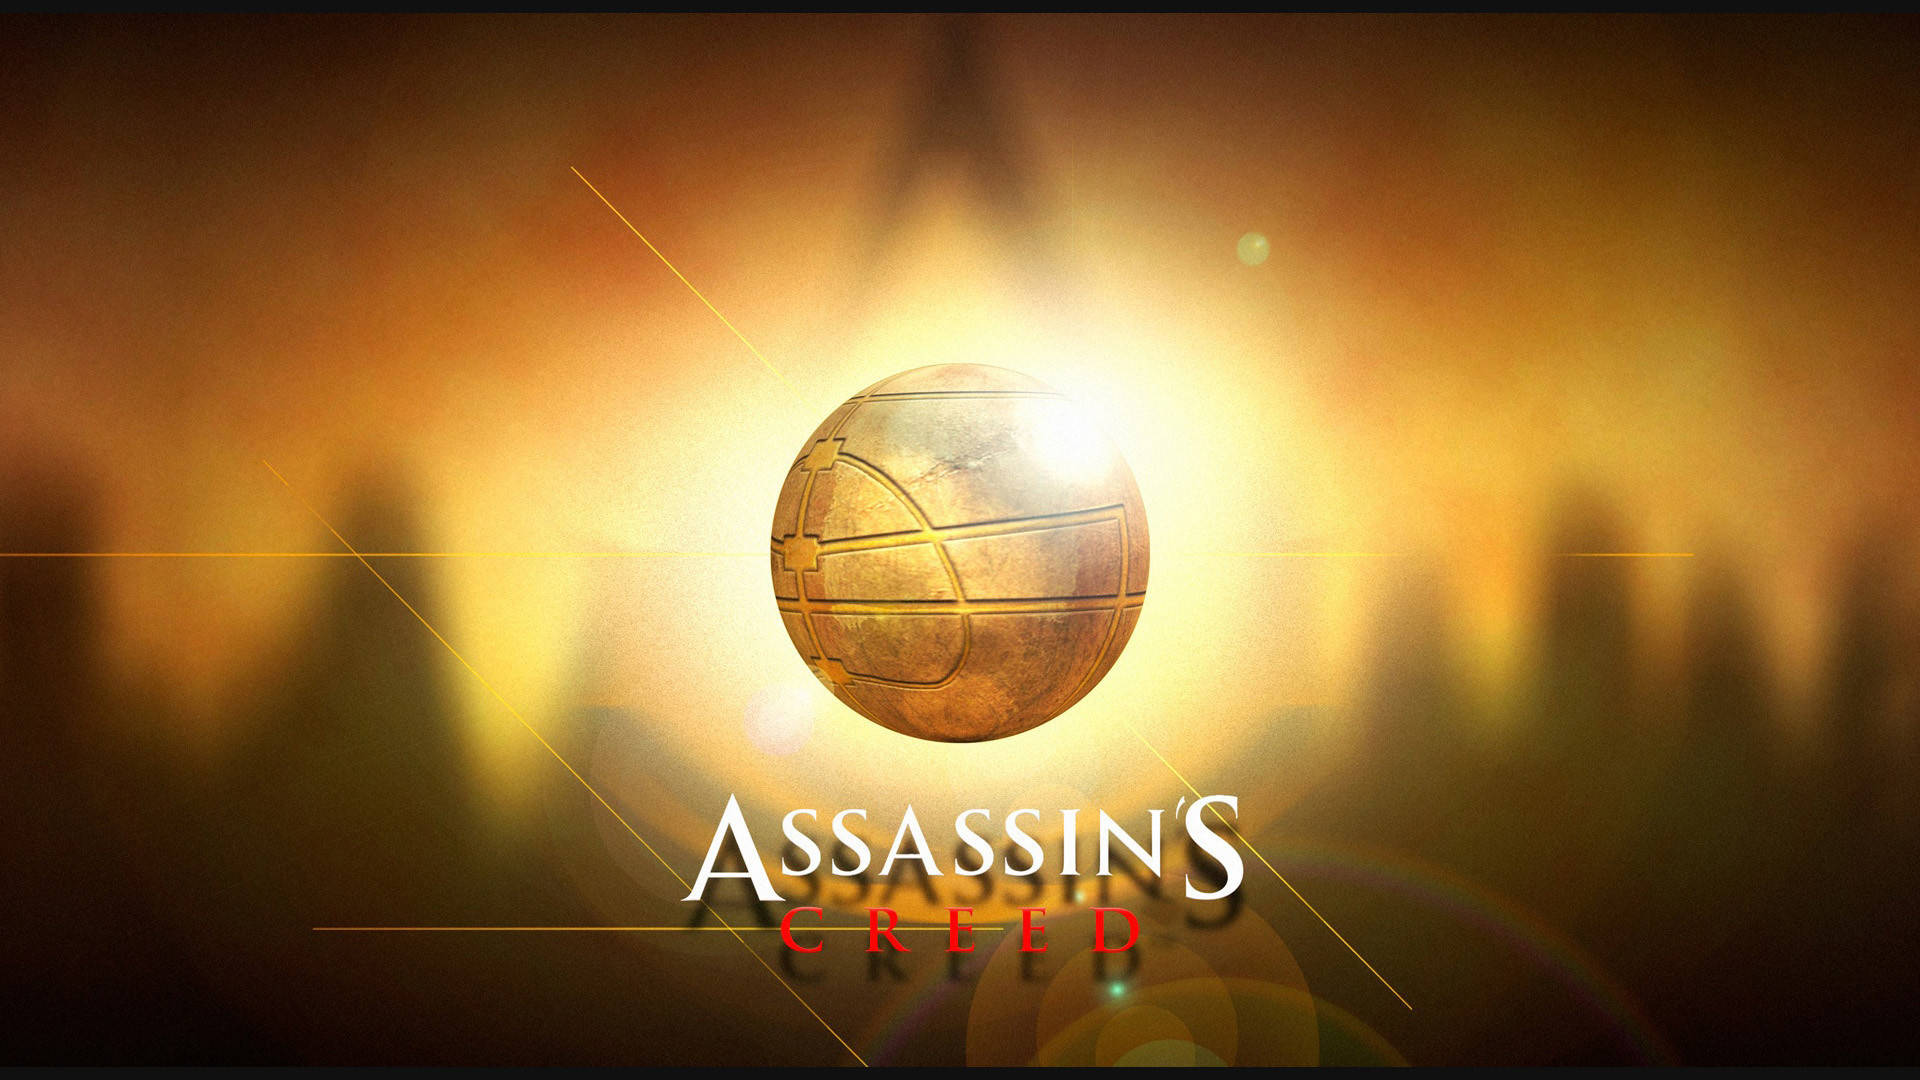 Assassin's Creed Golden Ball Symbol Background